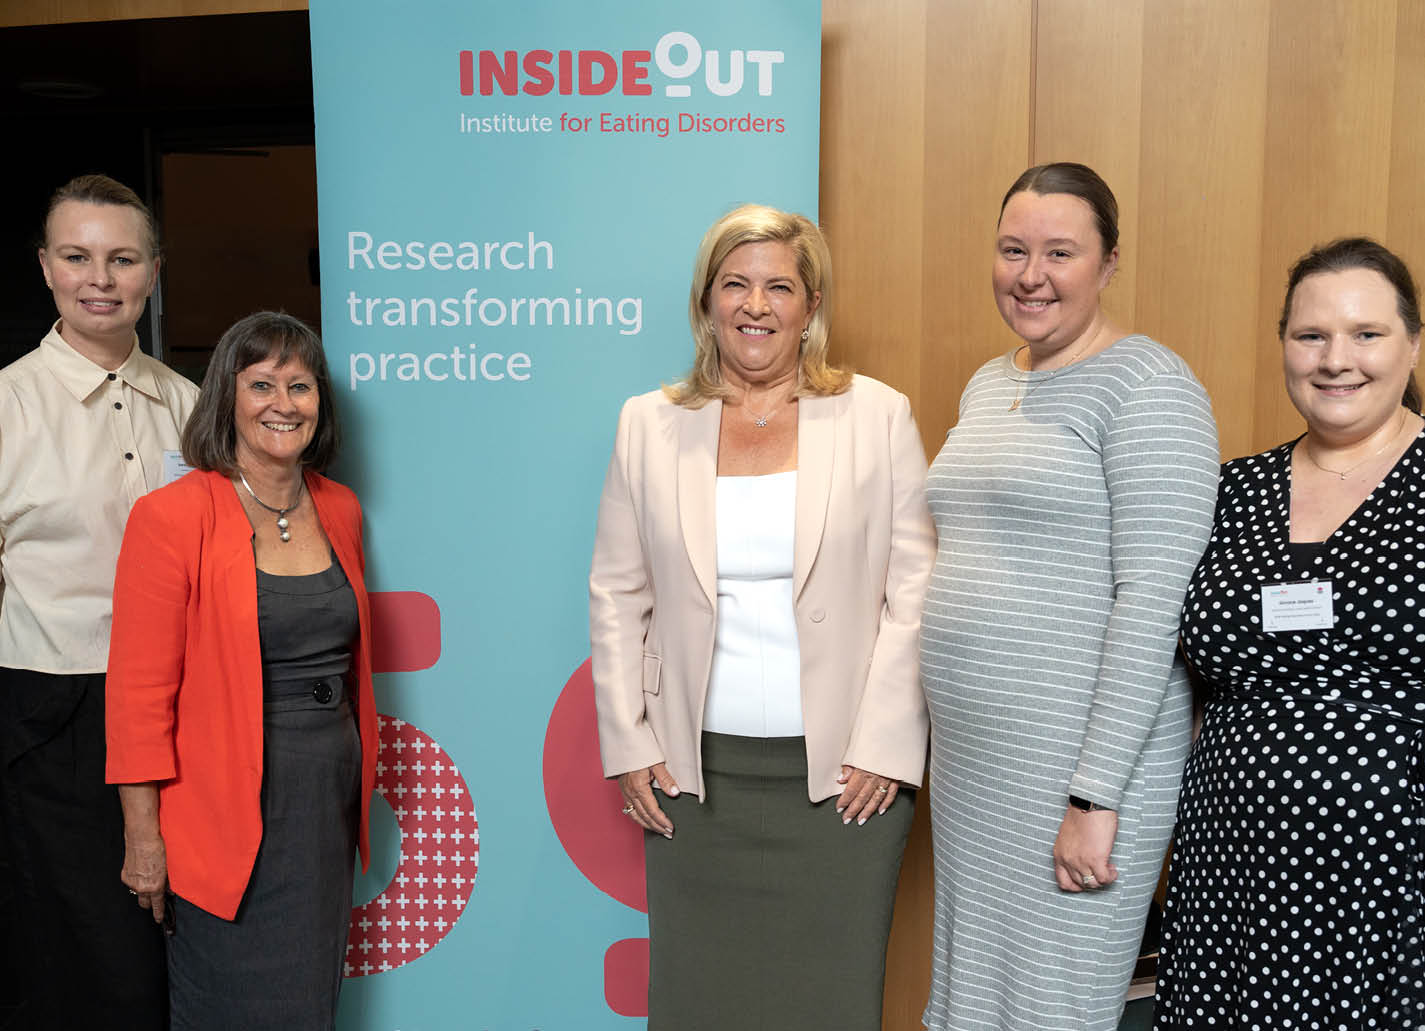 From left to right: Associate Professor Sarah Maguire, Director InsideOut Institute, Danielle Maloney, Deputy Director InsideOut Institute, NSW Minister for Women, Regional Health, and Mental Health Bronnie Taylor, Monique van Leeuwen, Northern Sydney Local Health District Eating Disorder Coordinator, Simone Jacques, Clinical Psychologist